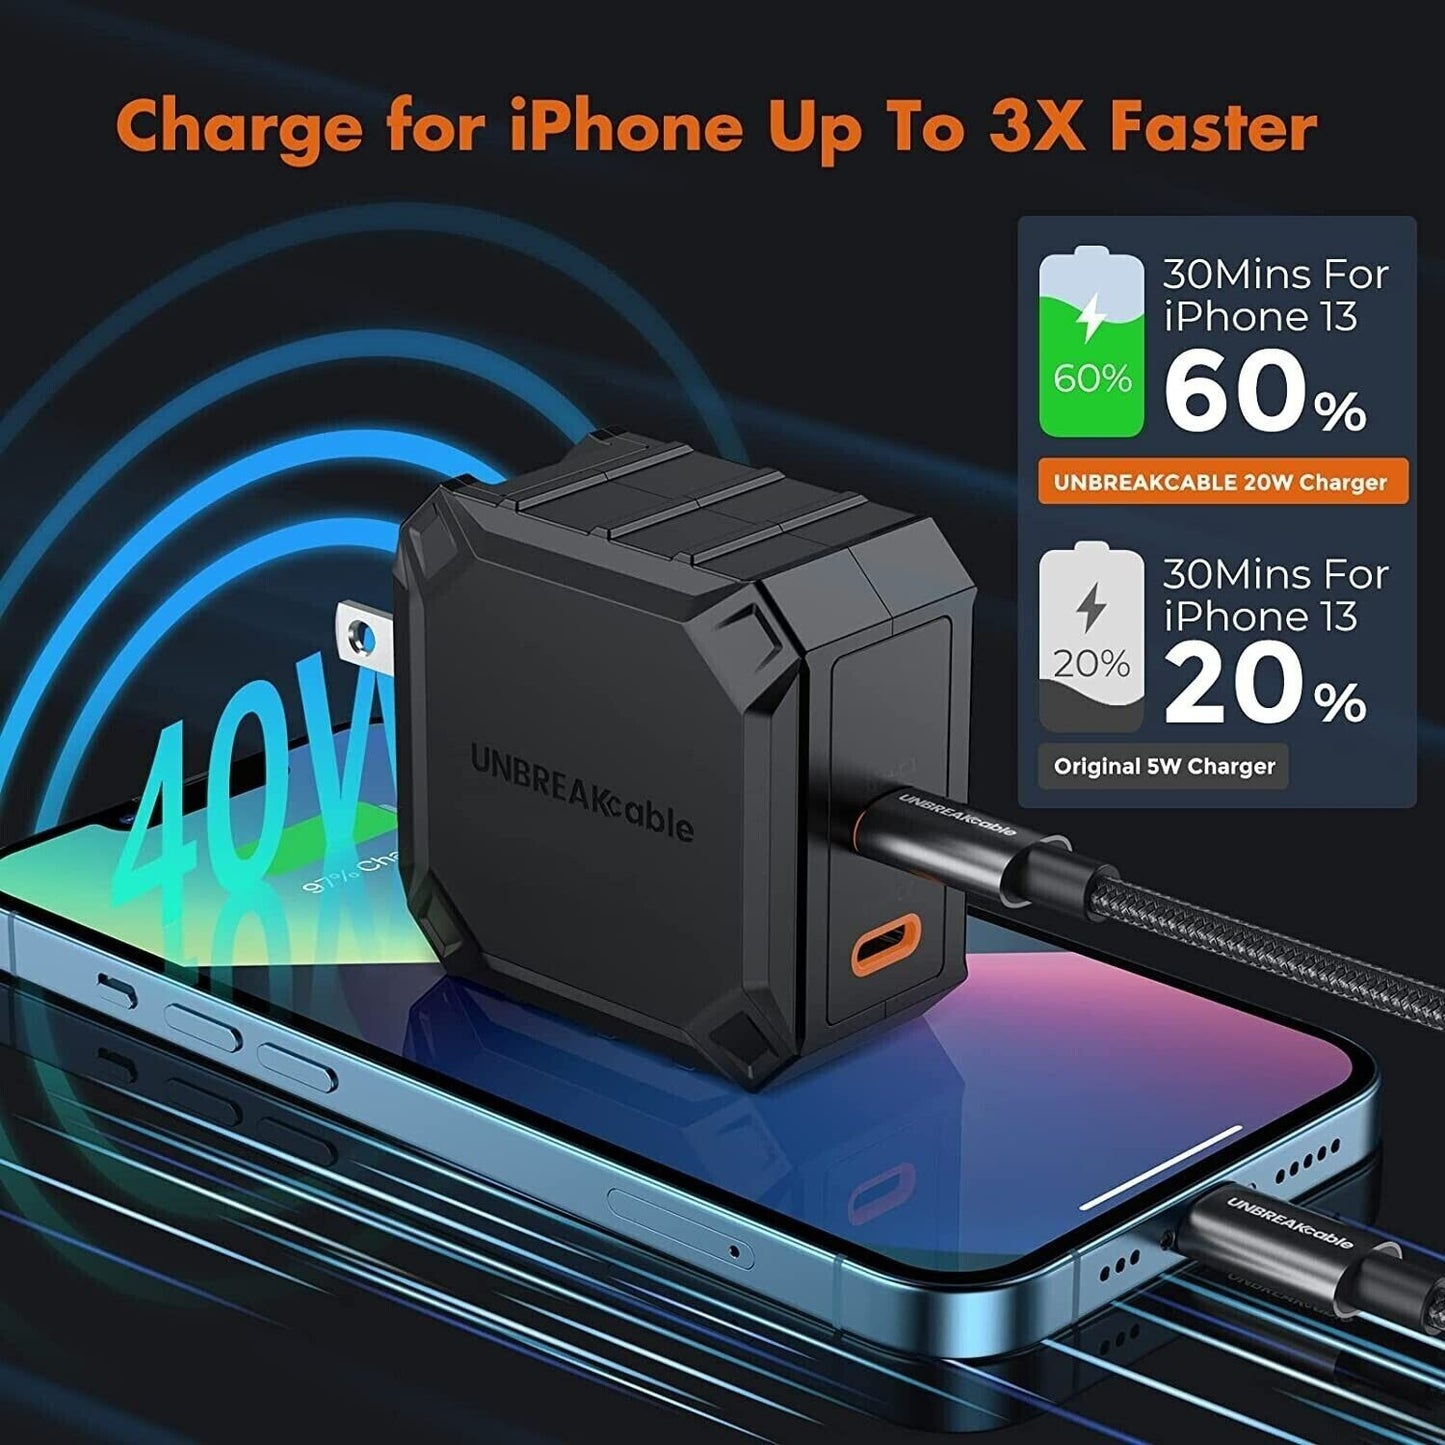 UNBREAKcable 67W PD USB C Charger Plug Quick Charge Multi Port Travel Adapter Fast Wall Charger for Apple MacBook Pro iPad Pro iPhone Android Laptops Phones Tablet Nintendo